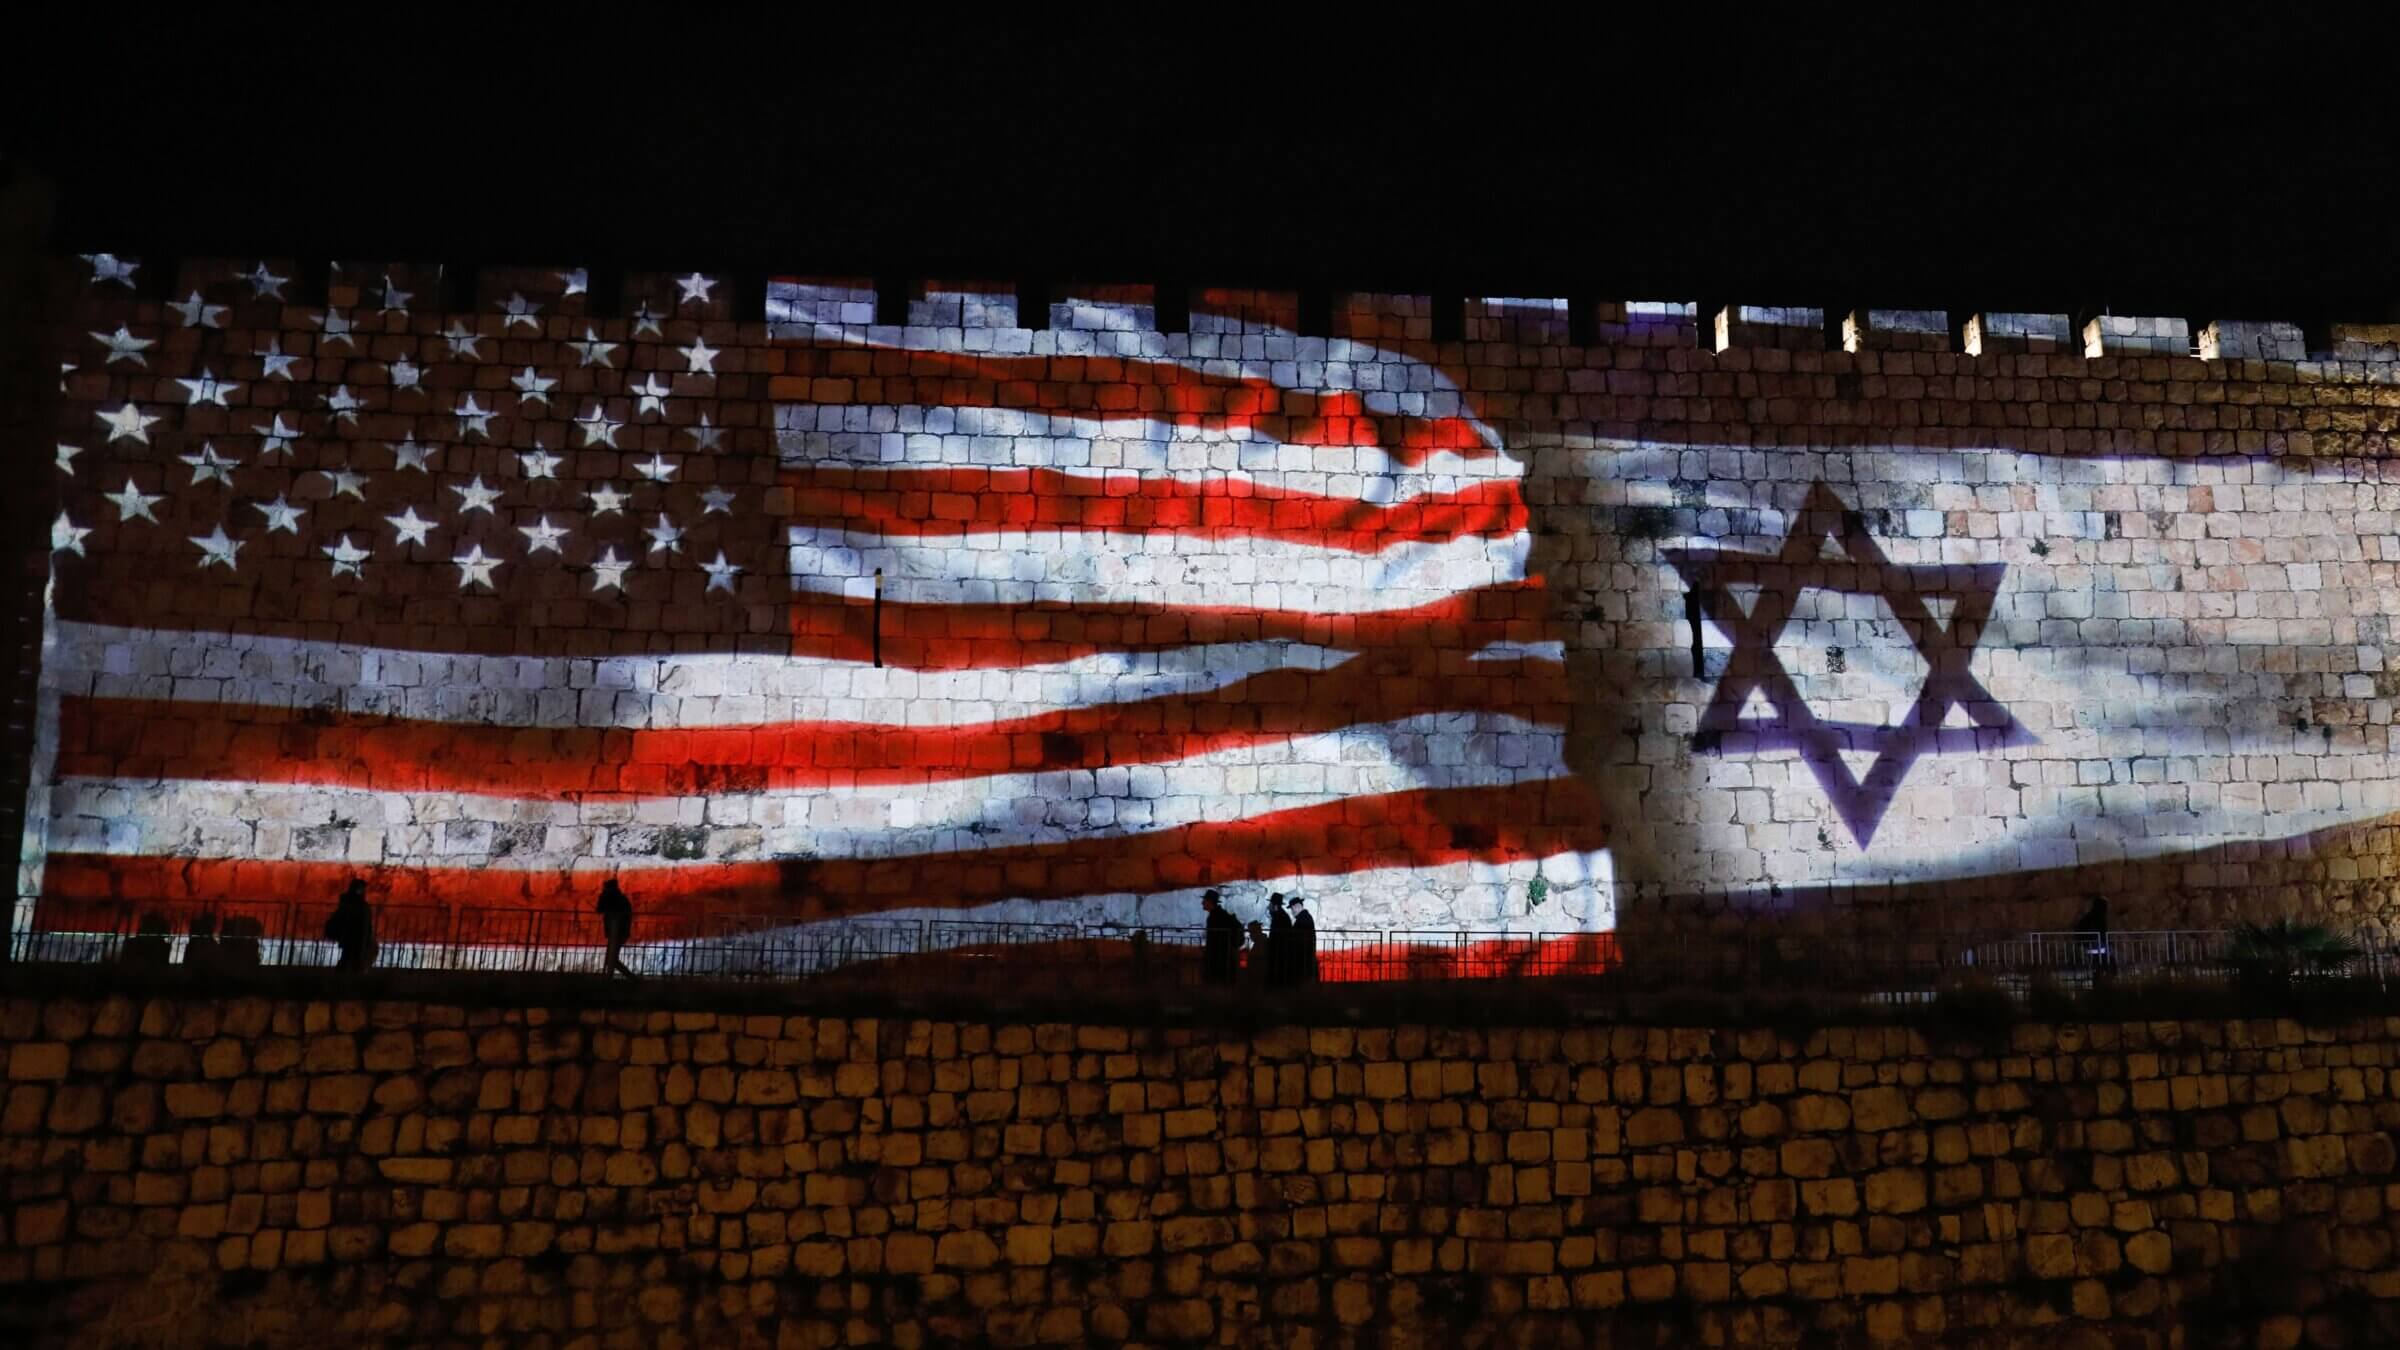 The Israeli and United States flags are projected on the walls of the ramparts of Jerusalem's Old City, to celebrate close ties between the two nations, on February 11, 2020